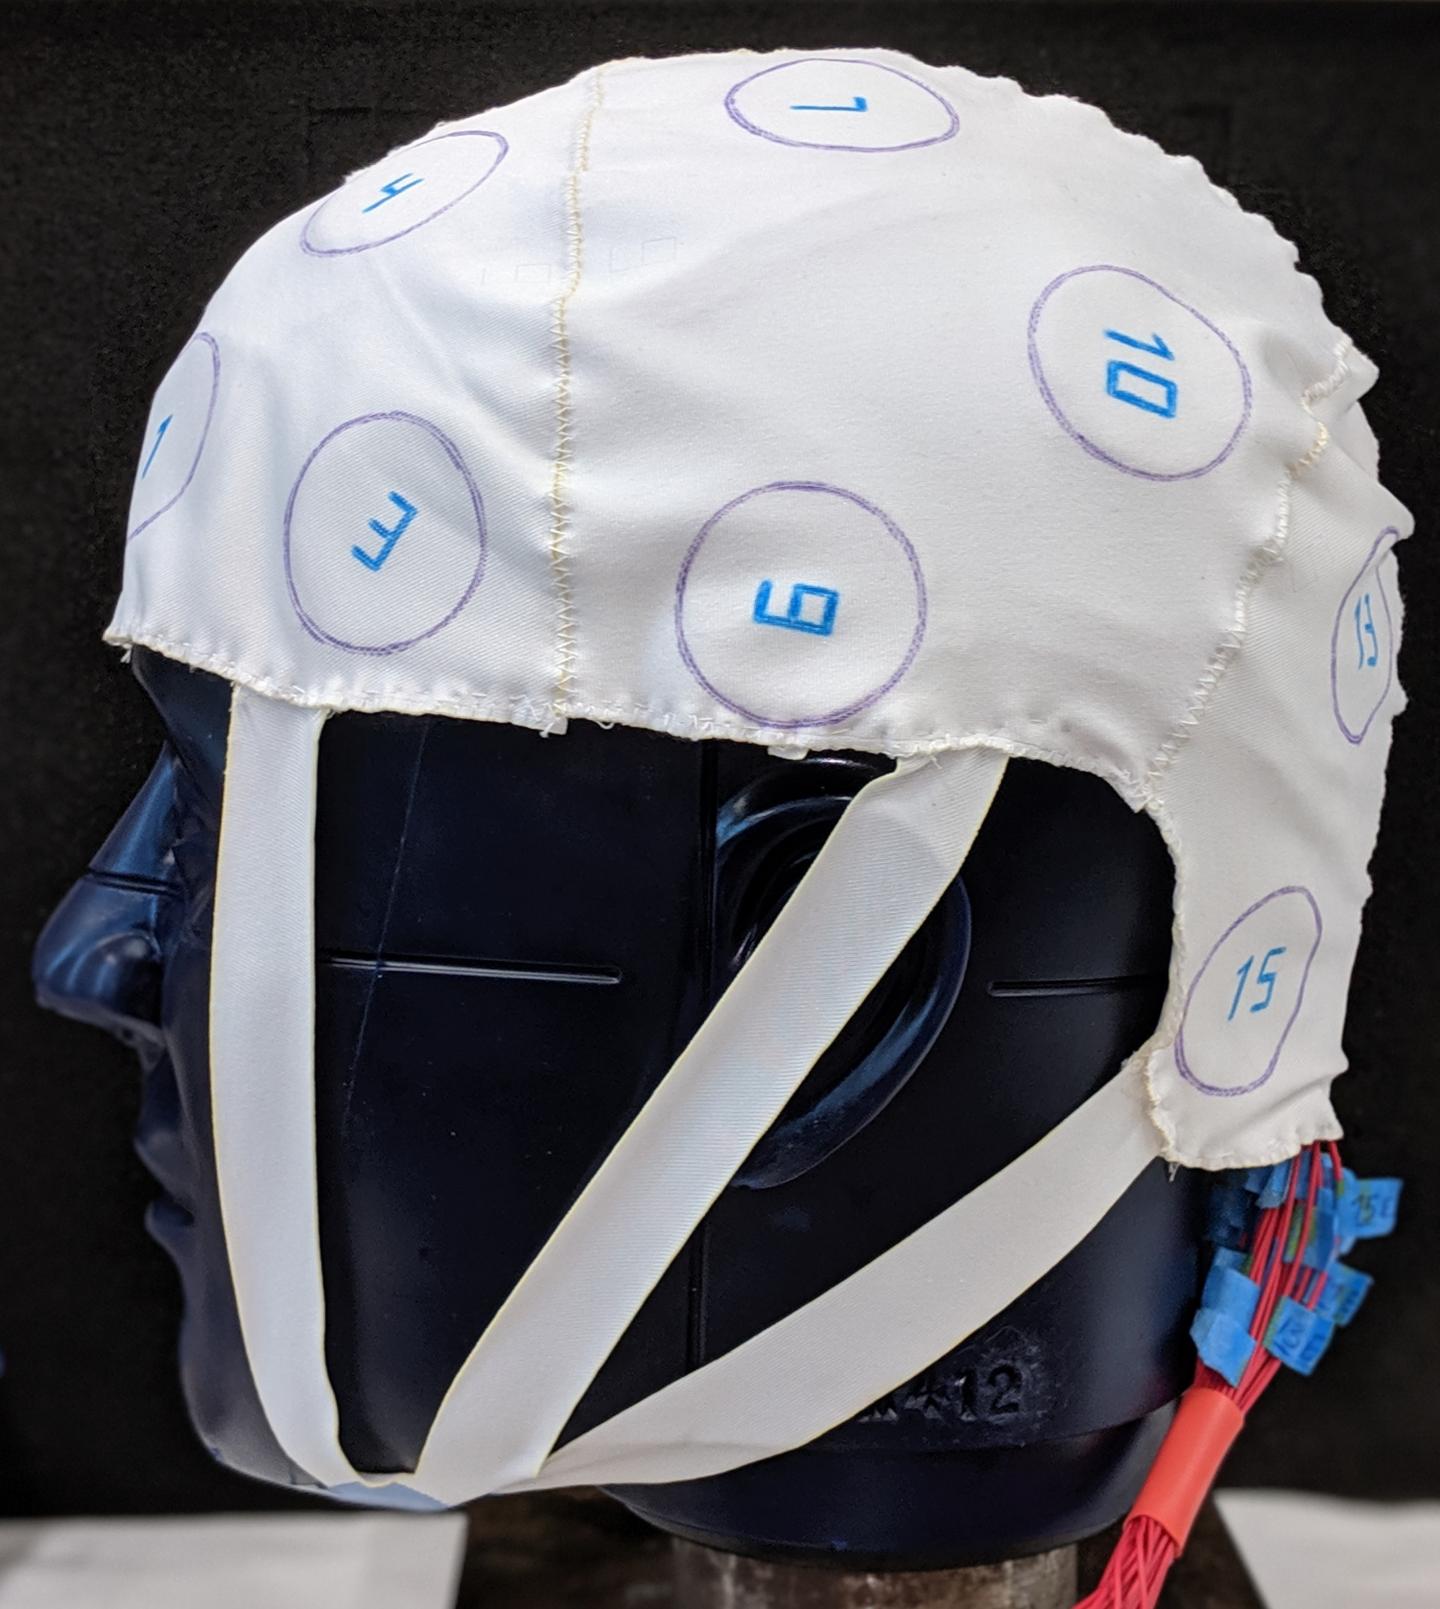 Pressure sensors could ensure a proper helmet fit to help protect the brain